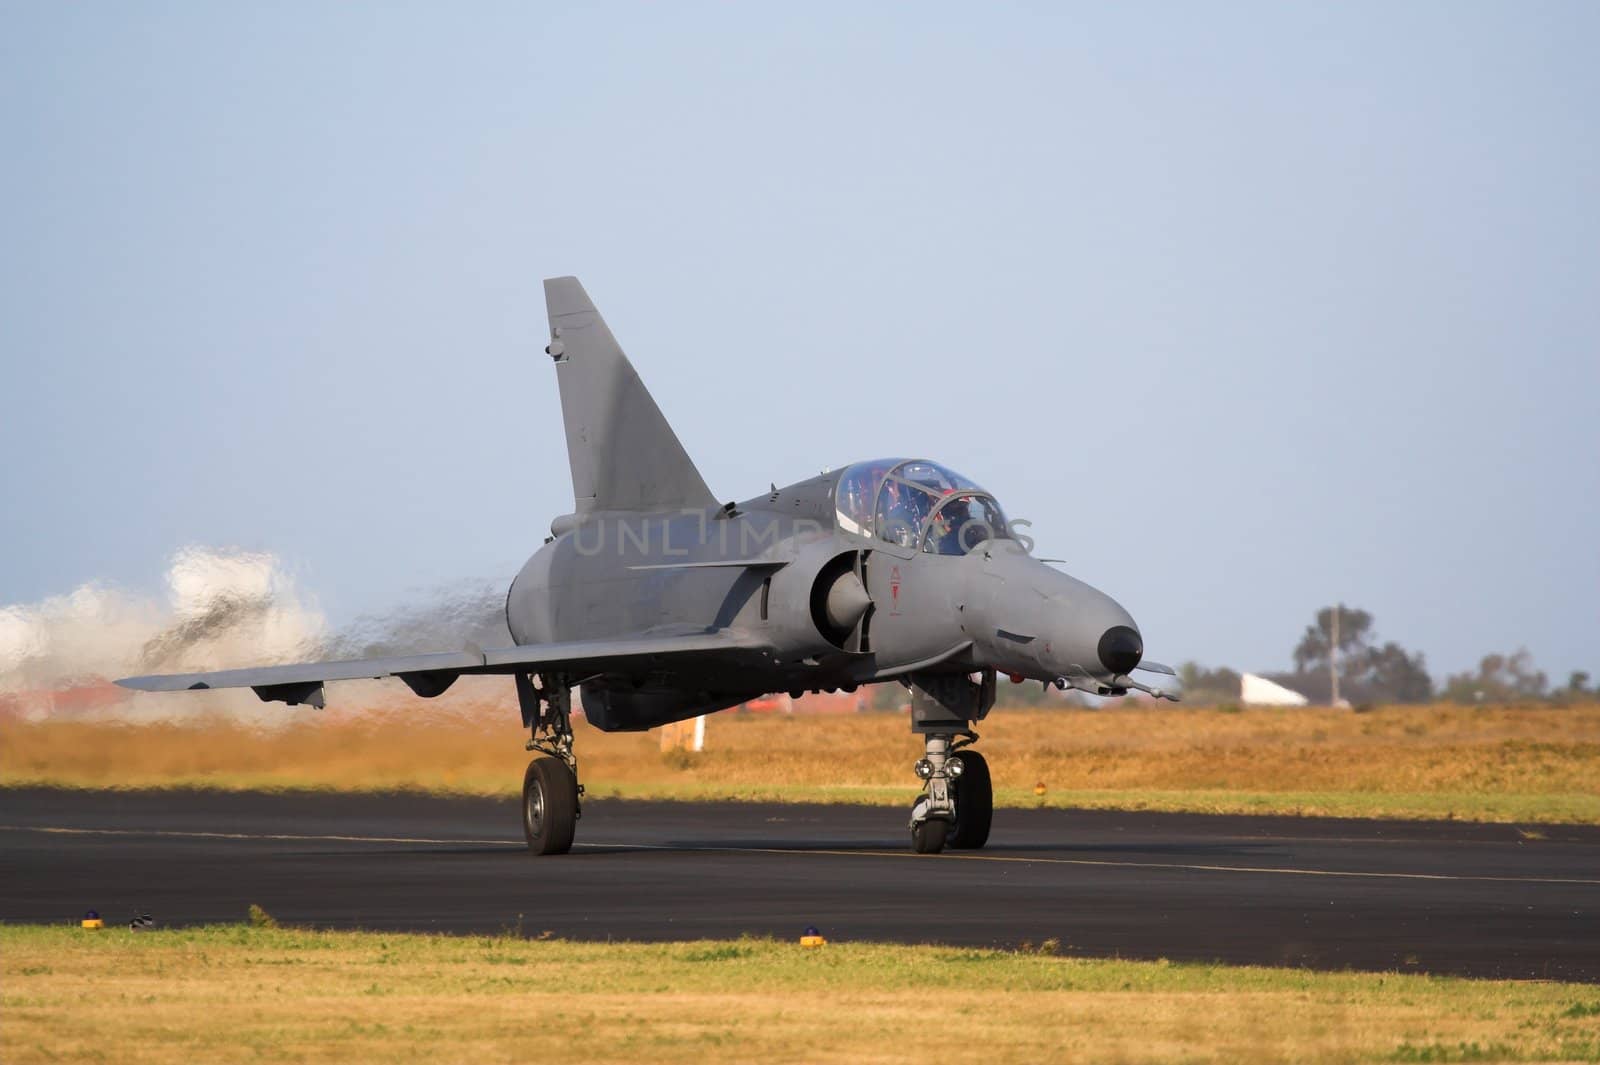 A Cheetah attack jet on the runway